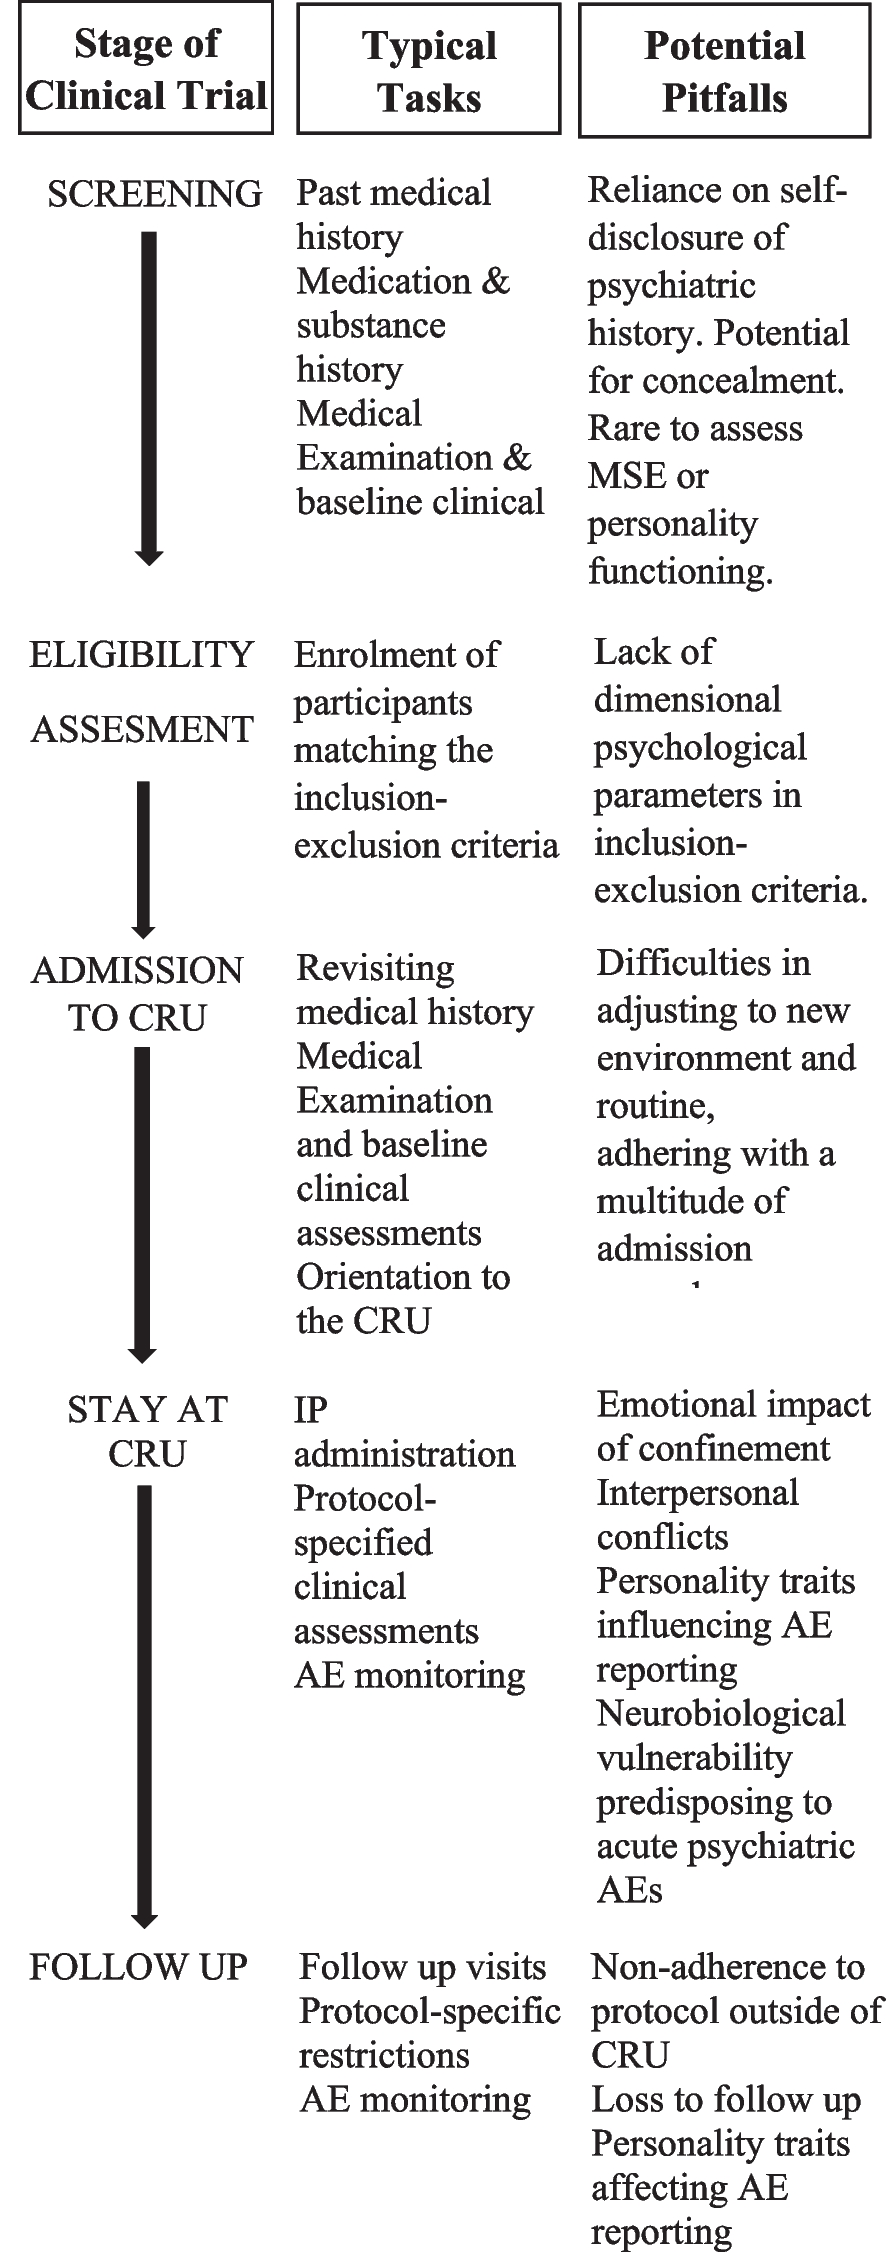 Personality vulnerabilities and adverse event reporting in phase 1 clinical studies